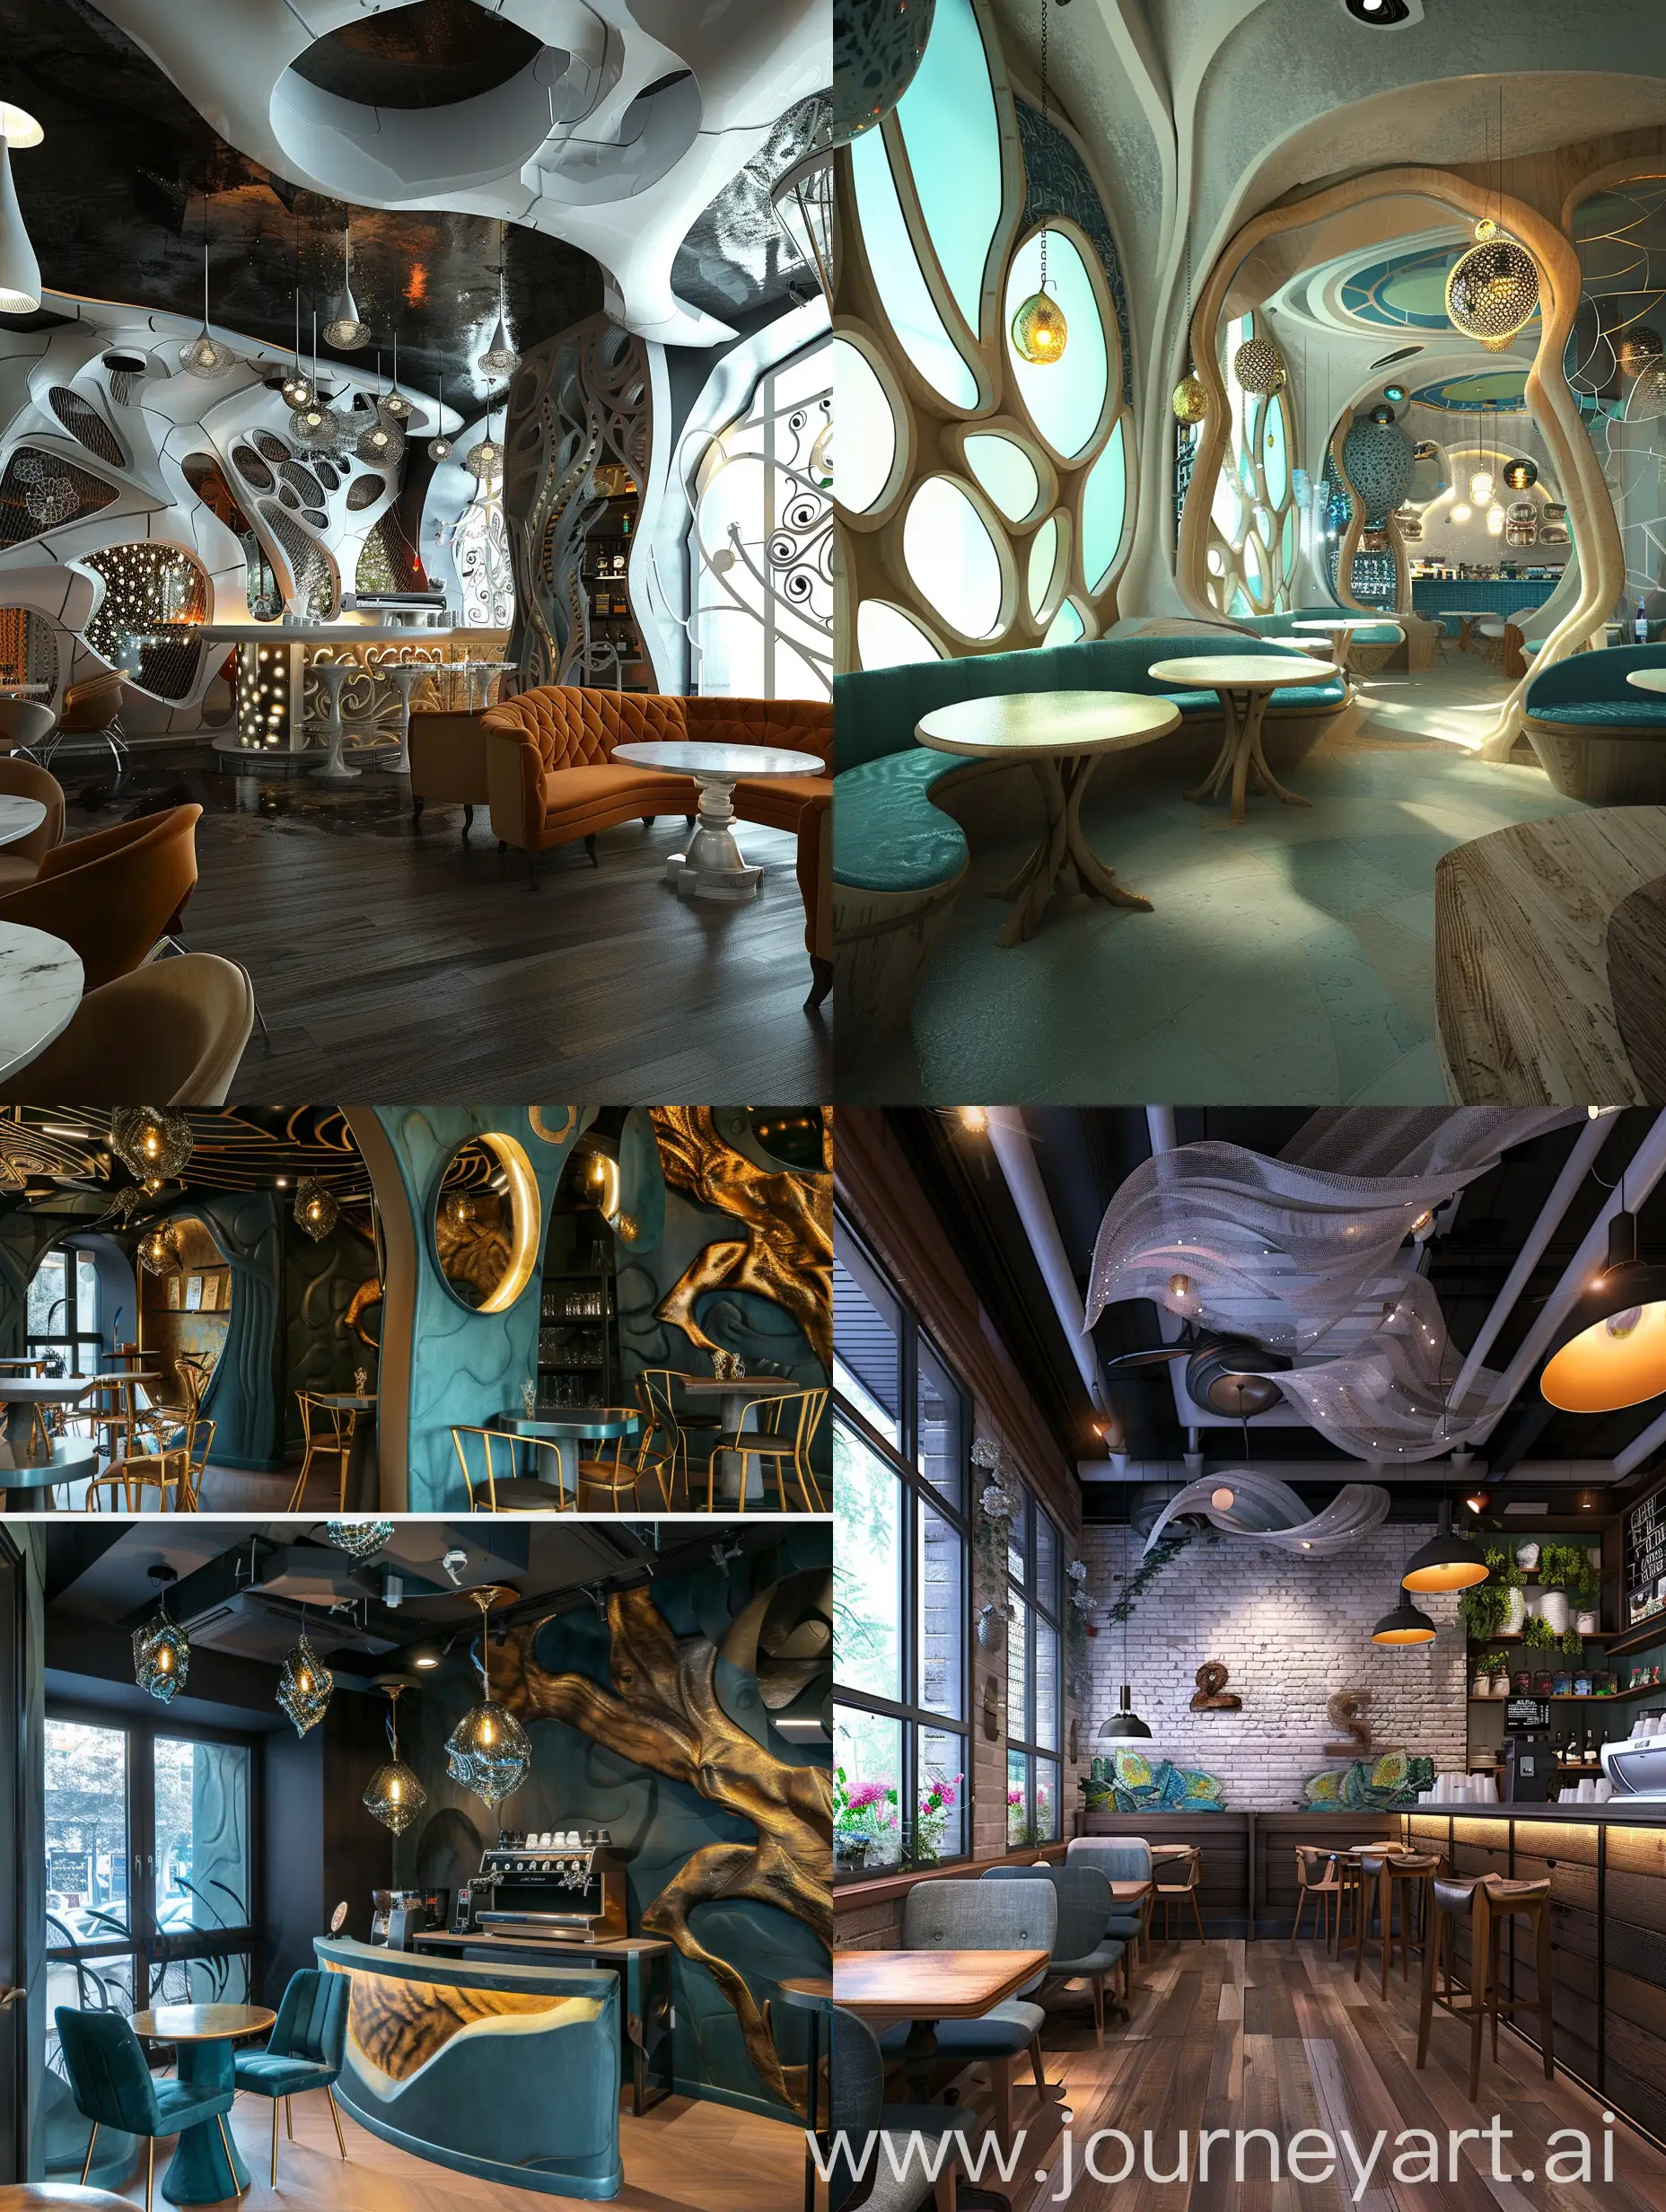 Cafe interior in a modern style, but with fantasy elements